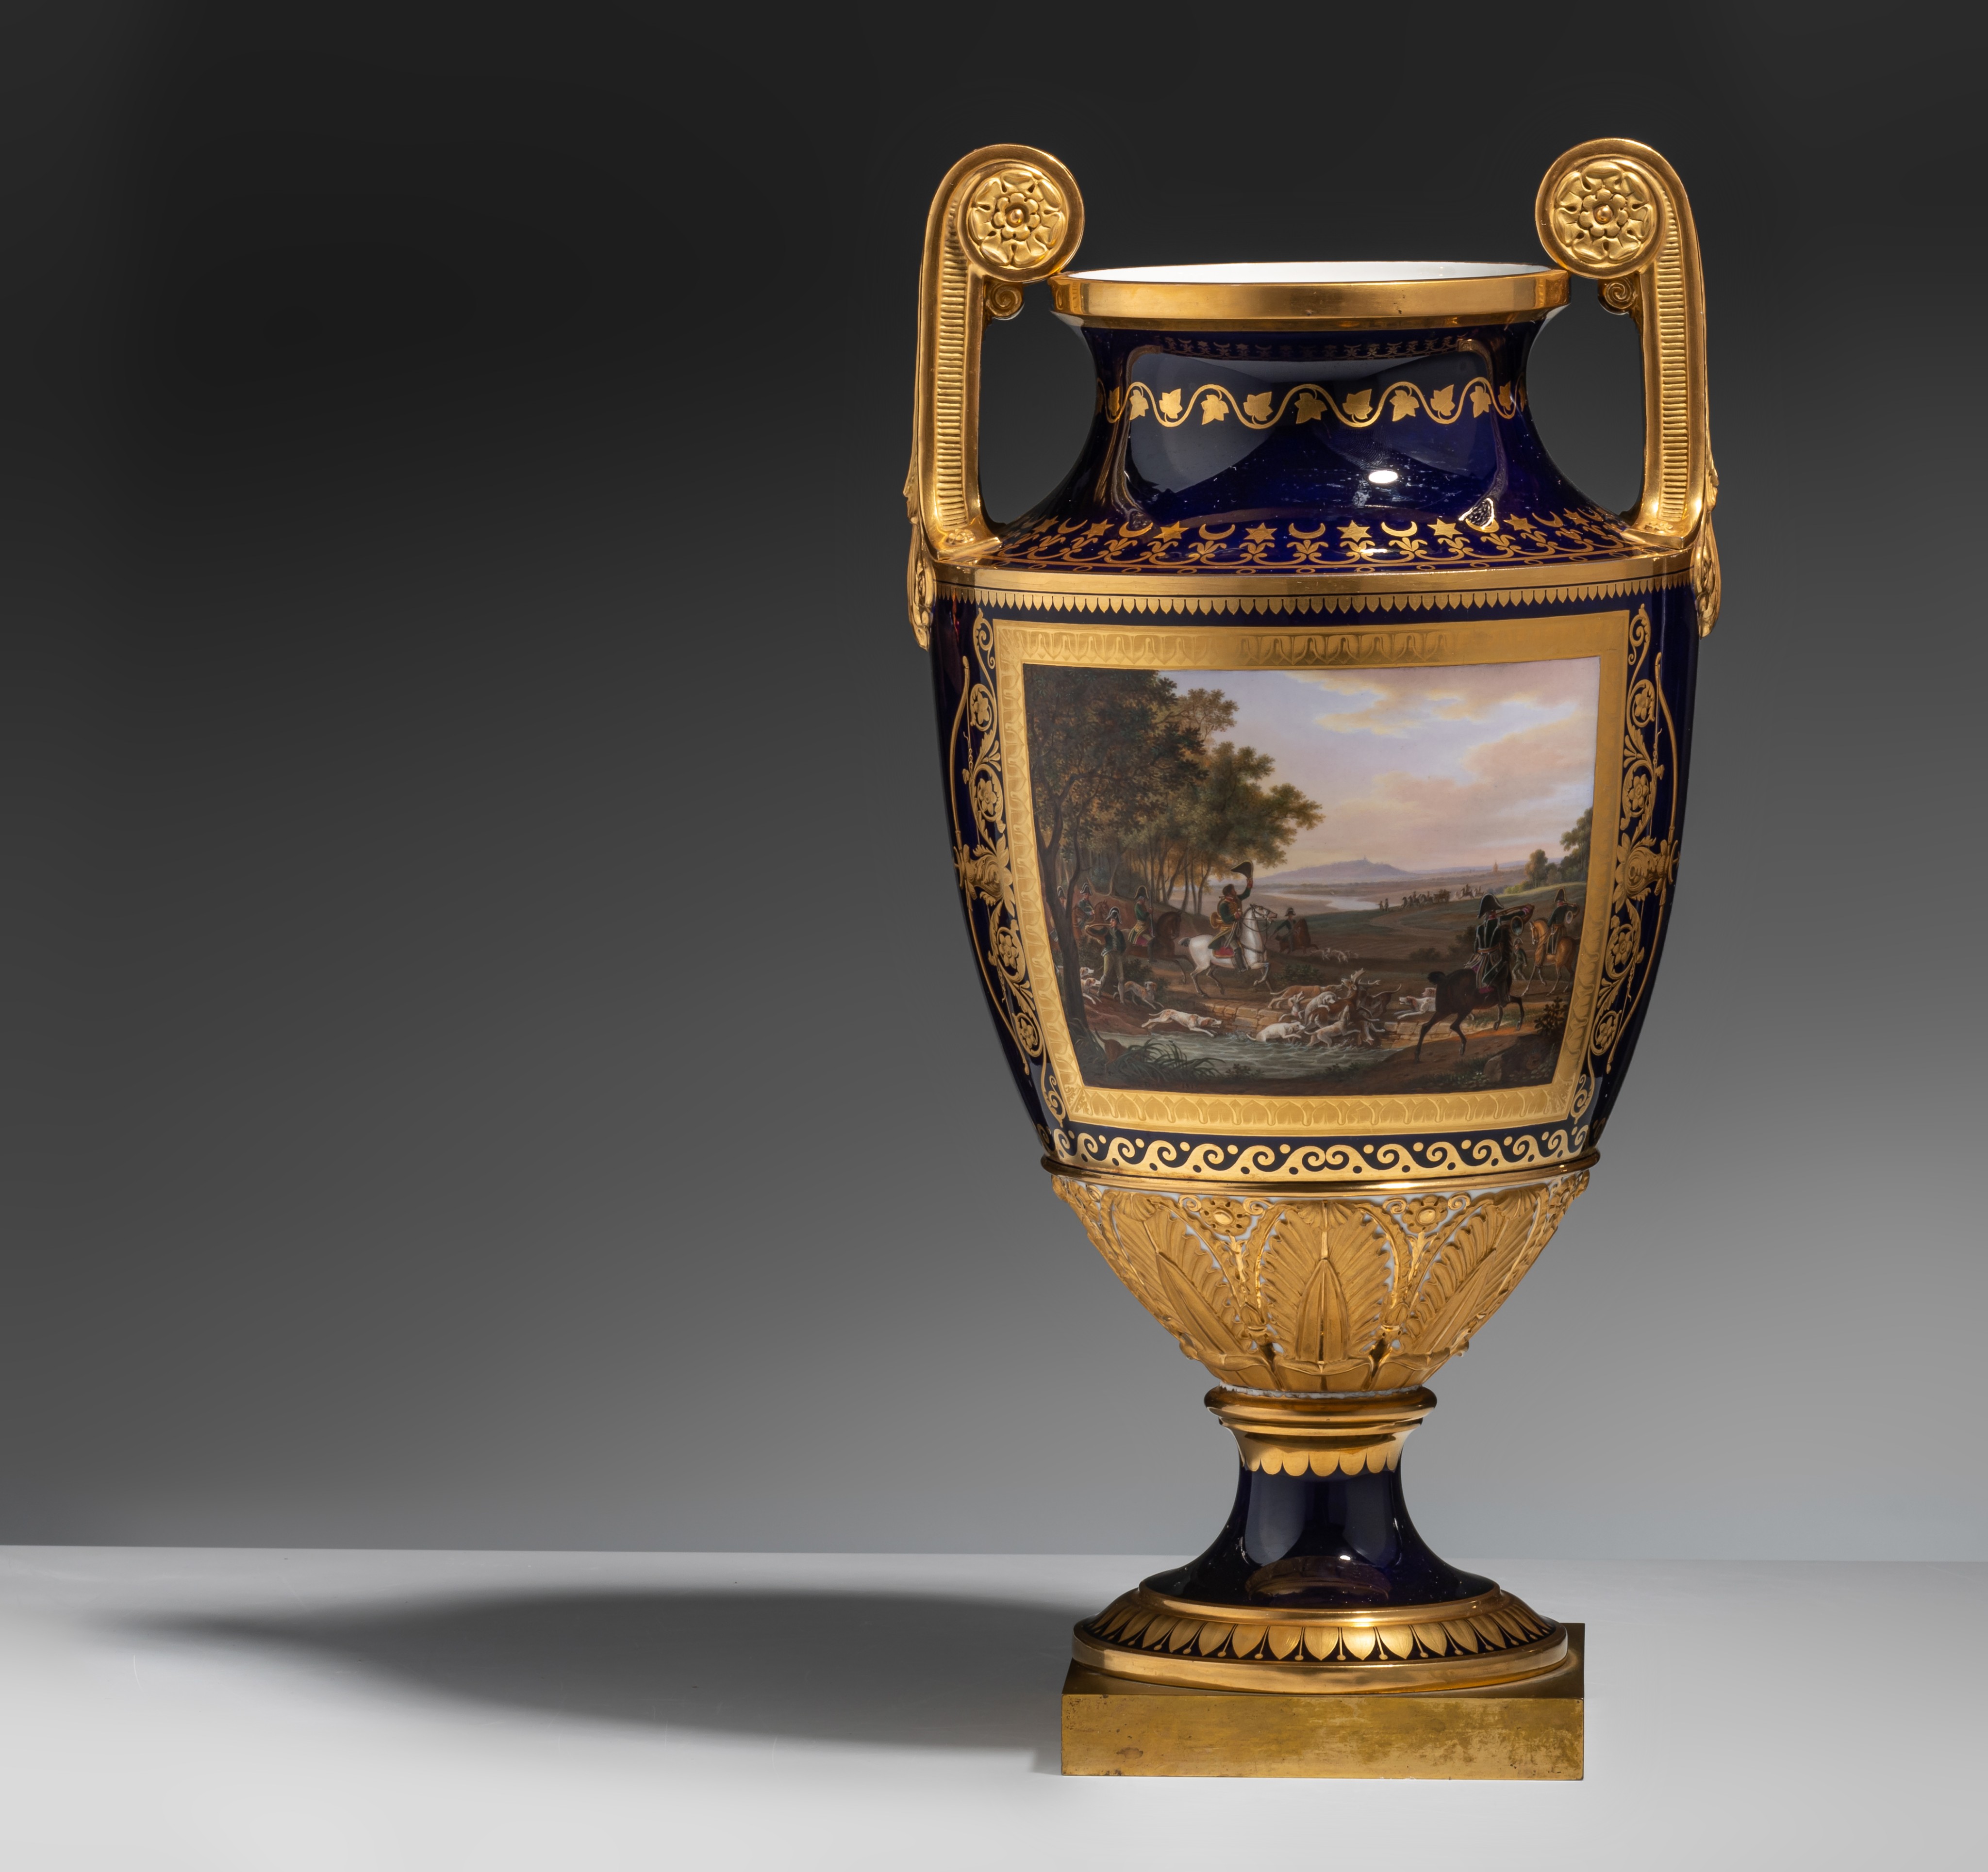 A very fine Empire Sèvres porcelain vase by Jean Charles Develly (1783-1862), 1819, H 44,5 cm - Image 2 of 7